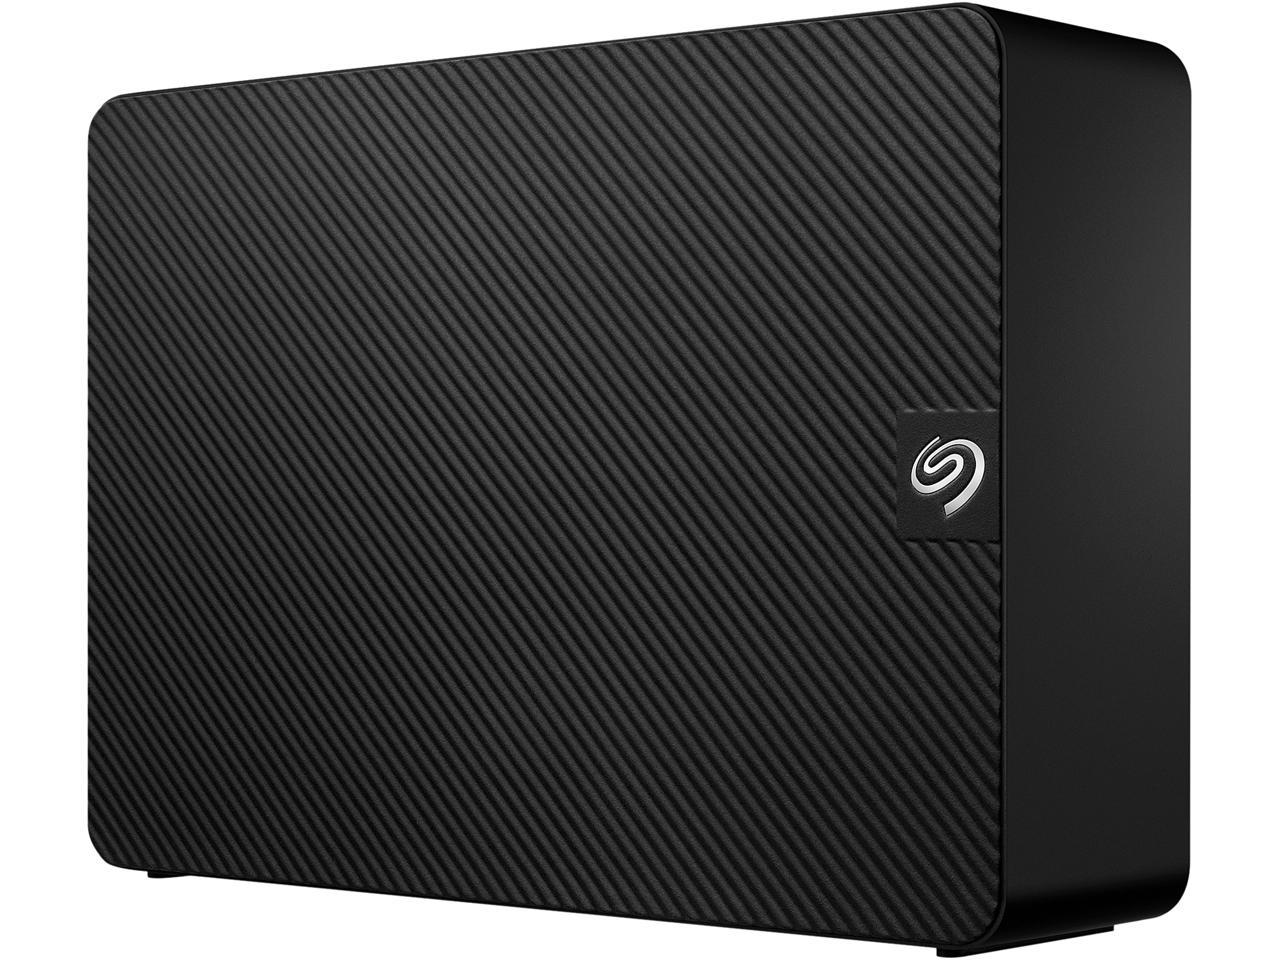 14TB Seagate Expansion External Hard Drive USB 3.0 with Rescue Data Recovery Services $200